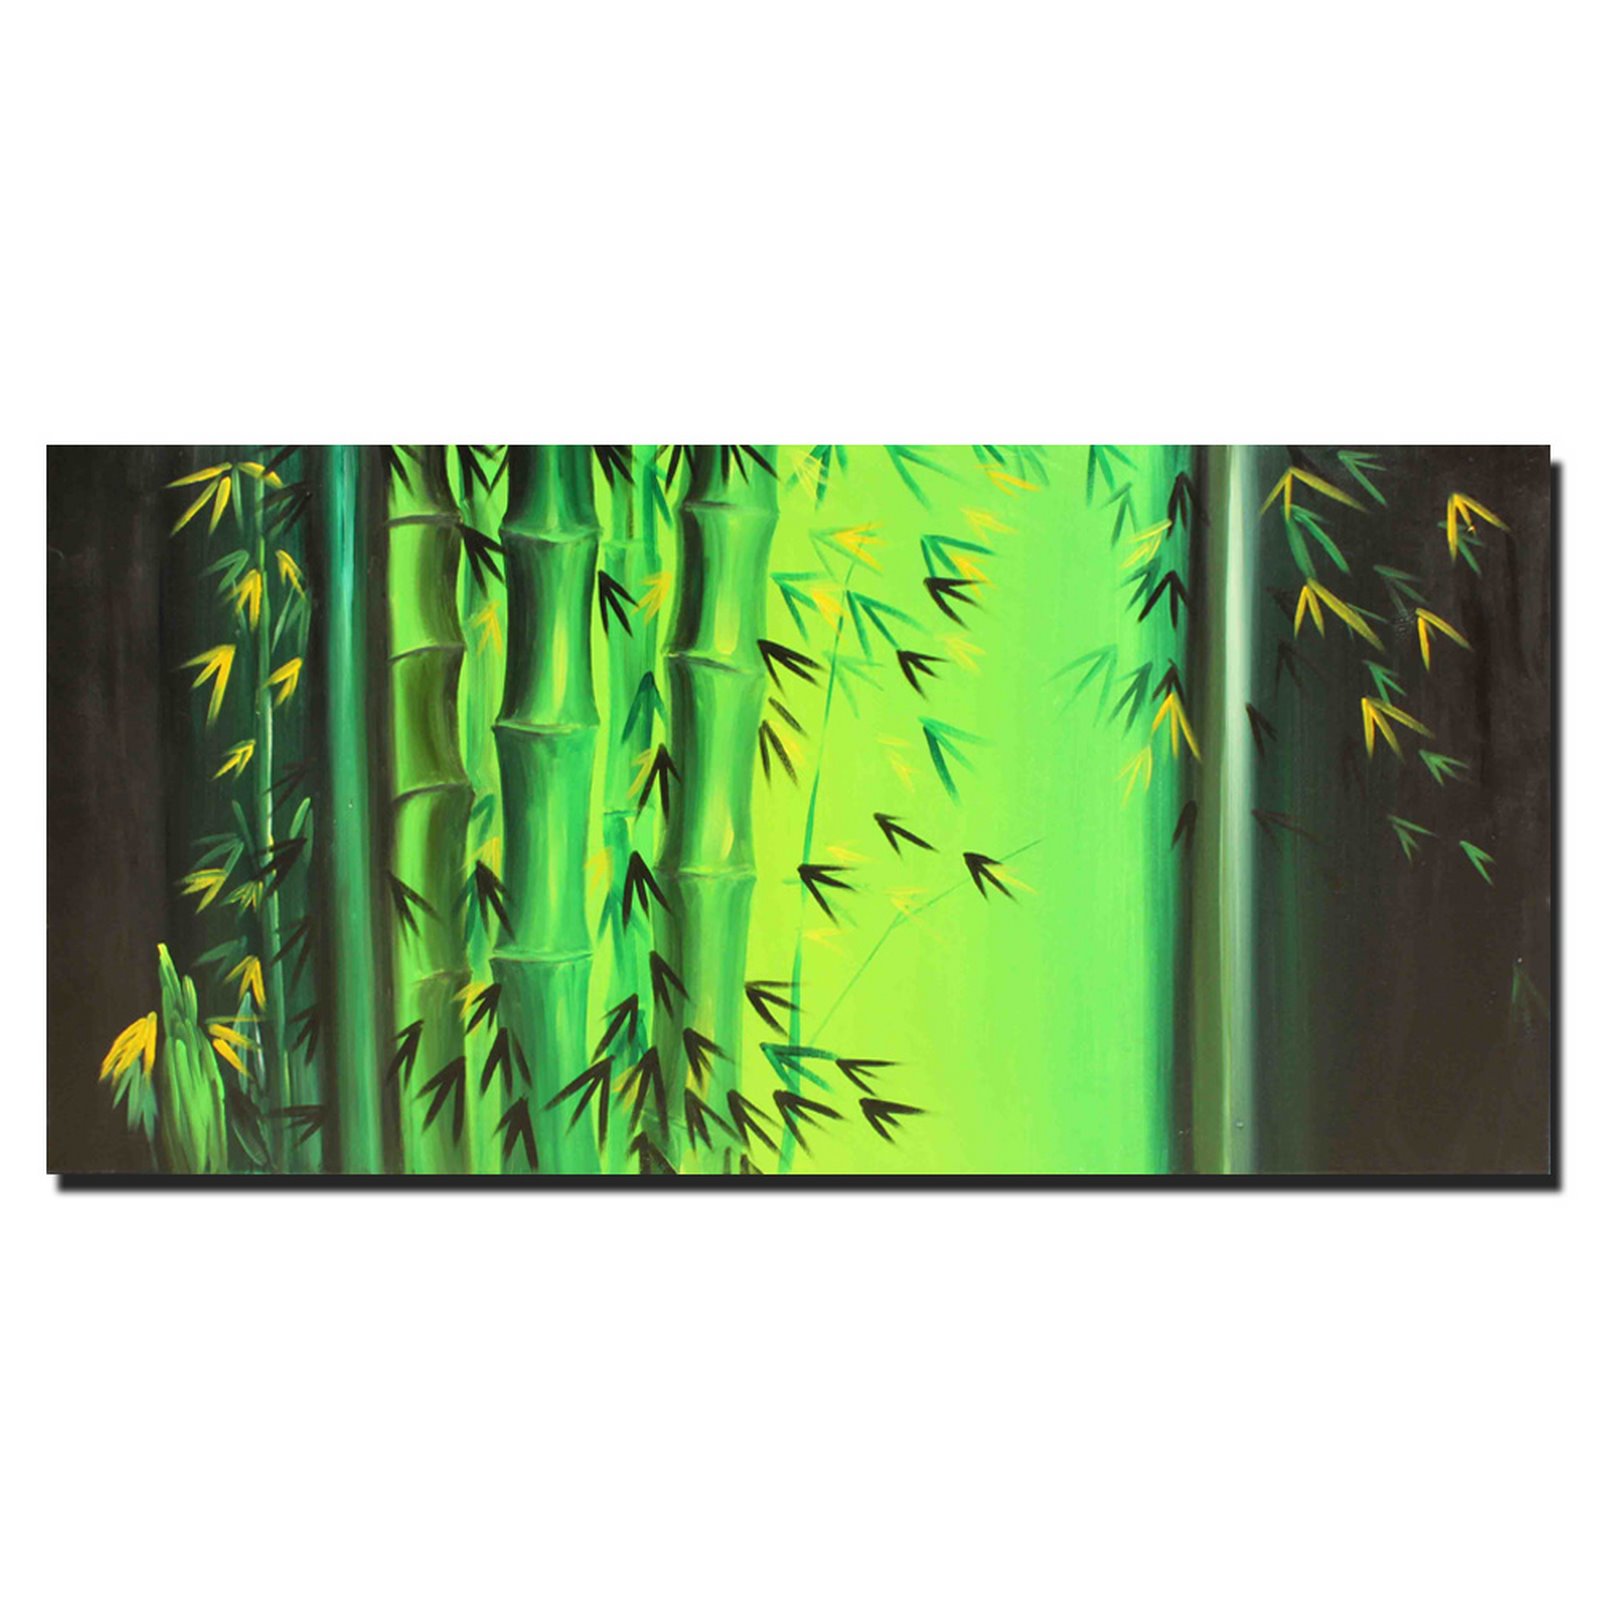 Bambo Abstract Wall Art - 32 x 26 in  - Textured Hand-Painted Fine Art - Stretched on wooden bars - Wall kit included